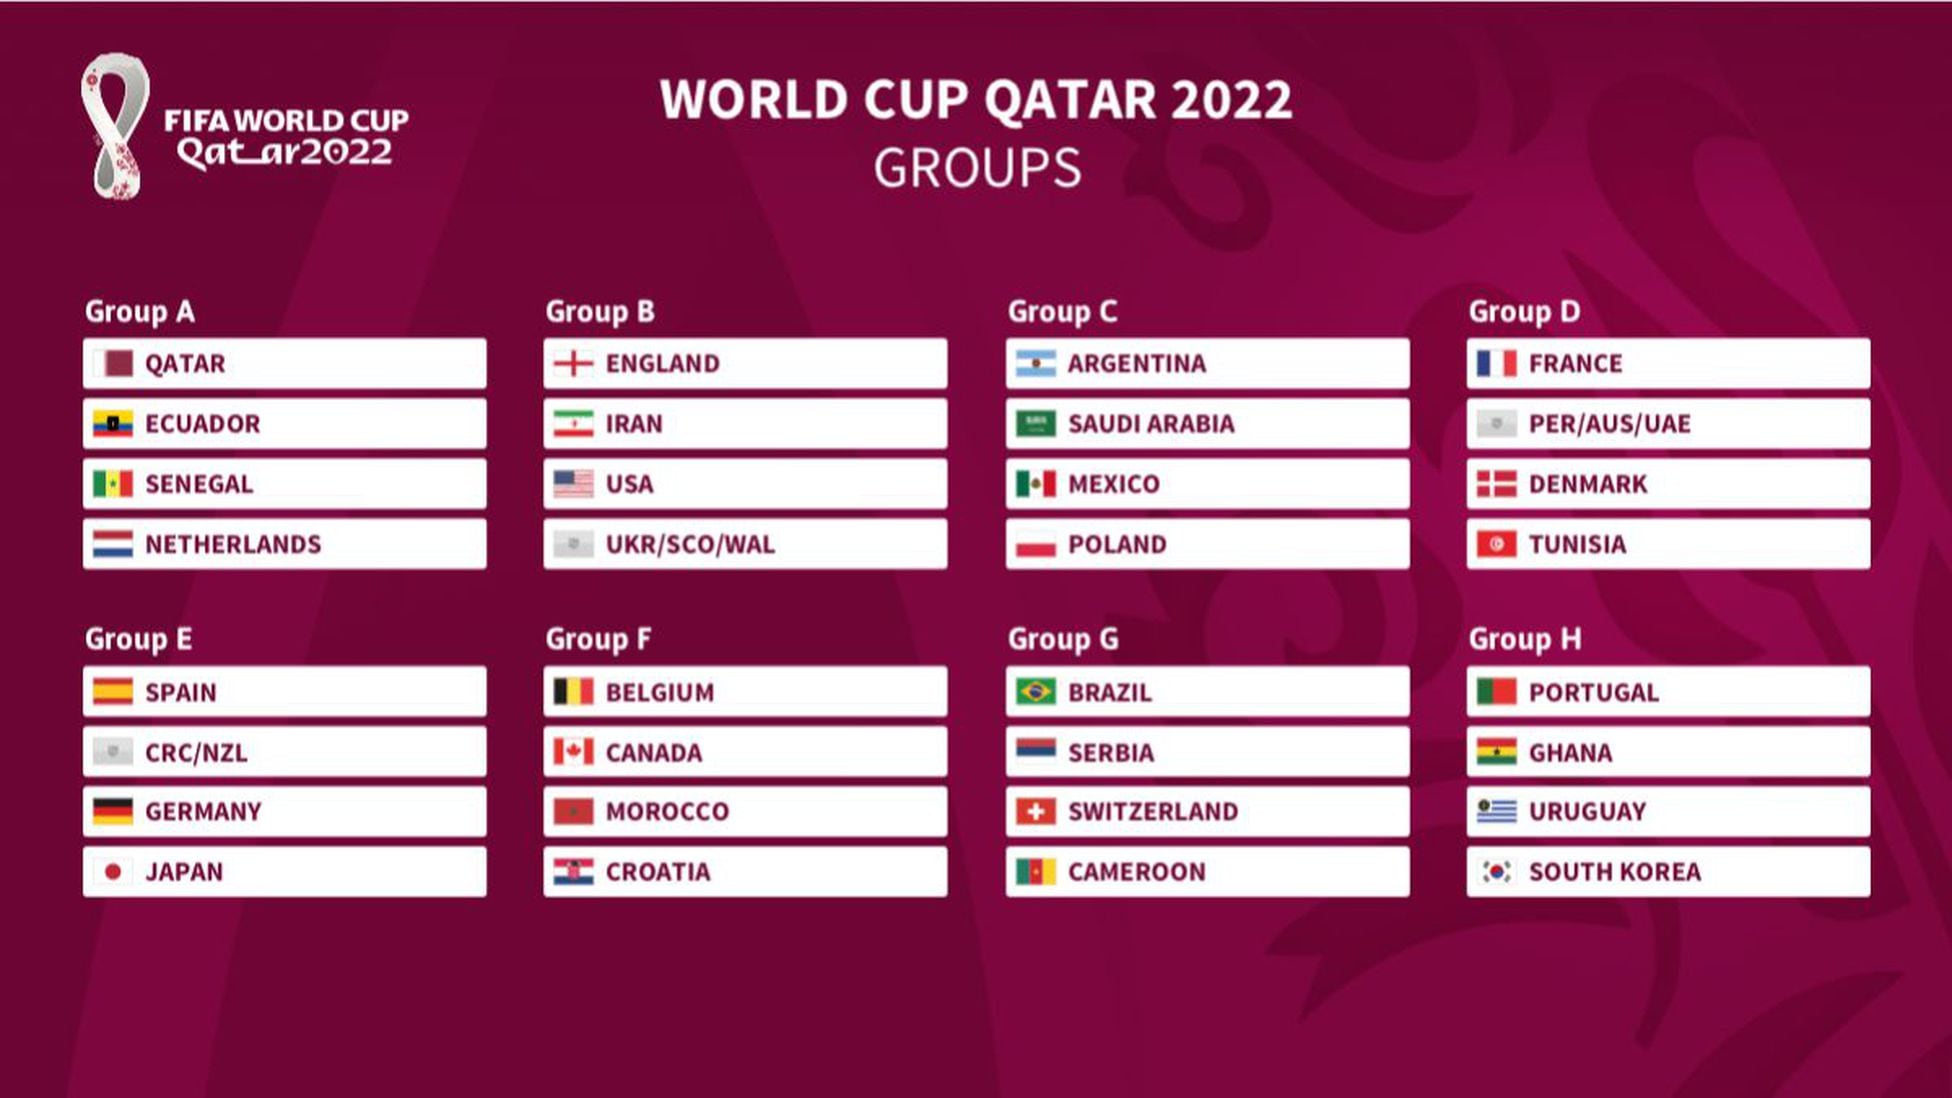 fifa world cup 2022 venue fifa world cup 2022 schedule qatar world cup dates fifa world cup 2022 2022 world cup qatar world cup fifa world cup 2022 groups football world cup 2022 qatar world cup 2022 2022 world cup dates qatar stadium qatar world cup stadiums qatar world cup schedule fifa world cup qatar 2022 qatar football stadium world cup qatar dates fifa world cup qatar qatar 2022 stadiums fifa qatar fifa qatar 2022 world cup final 2022 qatar 2022 dates world cup schedule fifa 2022 world cup 2022 draw 2022 fifa world cup date world cup 2022 stadiums qatar world cup 2022 dates world cup draw 2022 fifa world cup 2022 date group i world cup 2022 world cup 2022 date world cup 2022 groups next fifa world cup world cup groups 2022 fifa world cup schedule world cup 2022 location world cup draw fifa world cup 2022 fixtures fixture qatar 2022 qatar 2022 groups group world cup 2022 fifa world cup 2018 final 2022 fifa world cup location next world cup football the world cup fifa 2022 schedule next world cup 2022 world cup groups 2022 fifa world cup schedule qatar world cup fixtures last fifa world cup 2022 qatar qatar 2022 schedule qatar world cup groups qatar world cup 2022 schedule fifa schedule 2022 fifa world cup groups fifa world cup draw fifa 2022 groups 2022 world cup schedule world cup 2022 venue world cup dates 2022 fifa world cup final 2022 world cup groups qatar football world cup group fifa world cup 2022 fifa world cup 2022 stadiums qatar world cup 2022 stadiums fifa final world cup venues 2022 world cup final fifa world cup 2022 draw india in fifa world cup fifa world cup dates football world cup 2022 schedule world cup qatar 2022 dates qatar 2022 world cup schedule fifa world cup groups qatar 2022 world cup dates world cup 2022 group draw fifa 2022 world cup schedule next fifa world cup 2022 qatar 2022 world cup groups football world cup 2022 qatar 2022 fifa world cup final qatar world cup 2022 groups fifa world cup 2022 match schedule world cup schedule 2022 qatar fifa stadium world cup world cup football 2022 world cup fifa world cup fixtures fifa world cup 2022 group stage draw final world cup cup world cup group a fifa world cup 2022 dates for world cup 2022 group a world cup 2022 fifa world cup draw 2022 the world cup 2022 world cup qatar schedule qatar fifa world cup stadium fifa world cup locations 2022 schedule fifa world cup 22 world cup 2022 matches world cup 2022 final date qatar 22 world cup fifa world cup 2022 stadium the fifa world cup qatar world cup final stadium fifa world cup football football world cup 2022 venue fifa qatar world cup 2022 football world cup schedule fifa world cup schedule 2022 qatar stadium for fifa 2022 fifa world cup next date 2022 football world cup schedule fifa 2022 date fifa cup 2022 football fifa world cup 2022 fifa world 2022 fifa world cup 2022 group stage fifa world cup 2022 venue stadium fifa draw qatar world cup draw dates of world cup 2022 qatar world cup venues 2022 fifa world cup fixtures football qatar 2022 2022 world cup venue qatar world cup final fifa world cup venues fifa world cup 2022 final fifa worldcup 2022 world cup 2022 fifa football world cup 2022 dates world cup stadiums fifa 2022 stadiums 2022 qatar world cup schedule fifa world cup group stage 2022 fifa world cup stadium football world cup 2022 groups fifa world cup qatar 2022 groups qatar world cup dates 2022 qatar fifa world cup schedule groups for world cup 2022 qatar world cup final date fifa world cup 2022 draw date world championship football 2022 fifa 2022 fixtures cup schedule world cup 2022 final stadium 2022 world cup final stadium world cup 2022 qatar dates cup 2022 world cup 2022 dates qatar world cup qatar 2022 groups qatar 2022 world cup fixtures qatar 2022 final fifa 22 qatar 2022 fifa world cup match schedule fifa groups fifa schedule 2022 2022 world groups of world cup 2022 2022 world cup final date qatar 2022 fixtures fifa world cup 2022 qatar schedule fifa international fifa 2022 draw fifa football world cup 2022 fifa world cup groups 2022 world cup football 2022 schedule qatar world cup 2022 match schedule qatar 2022 ball fifa world cup 2022 final match stadium fifa world cup 2022 qatar stadiums foot ball world cup world cup 2022 qatar schedule qatar schedule fifa world cup dates 2022 fifa 2022 stadium world cup qatar groups fifa full fifa world cup qatar 2022 fixtures qatar football stadium for world cup 2022 qatar world cup 2022 fixtures qatar world cup ball qatar fifa world cup dates draw fifa world cup 2022 world fifa cup 2022 schedule of fifa world cup 2022 fifa world qatar 2022 fifa 2022 match schedule fifa 2022 world cup groups qatar cup 2022 fifa qatar stadium world cup 2022 group a world in 2022 world football cup 2022 fifa world cup qatar 2022 schedule world fifa group qatar 2022 fifa world cup 2022 final match date date of fifa world cup 2022 fifa world cup final 2022 world cup final 2022 date next football world cup 2022 world cup qatar 2022 schedule fifa football 2022 fifa dates 2022 fifa 2022 location world qatar 2022 2022 fifa world cup group stage qatar world cup city cup qatar 2022 fifa world cup qatar stadium world cup after qatar 2022 fifa world cup final stadium fifa world cup 2022 matches fifa world cup football 2022 dates for qatar world cup final world cup 2022 next world cup location 2022 2022 world cup group stage draw fifa world cup 2022 football qatar 2022 world cup ball schedule fifa world cup 2022 fifa world cup 2022 final stadium qatar 2022 match schedule fifa world cup qatar schedule schedule world cup 2022 football world cup 2022 location qatar world cup match schedule next world cup 2022 location qatar football stadium 2022 world cup football 2022 groups qatar 2022 venues dates world cup 2022 fifa qatar 2022 schedule qatar 2022 football 2022 fifa world cup matches qatar football stadiums world cup 2022 qatar football world cup 2022 schedule 2022 world cup city fifa 2022 world cup dates when fifa world cup qatar football world cup schedule fifa world cup qatar 2022 match schedule dates for 2022 world cup qatar fifa 2022 stadium fifa world cup qatar dates when fifa world cup 2022 dates of qatar world cup dates of 2022 world cup fifa 2022 world cup stadiums 2022 fifa world cup football world cup qatar 2022 stadiums fifa world cup 2022 final date qatar groups world cup qatar schedule world cup 2022 qatar world cup dates qatar 2022 world cup draw final 2022 fifa 2022 final schedule qatar 2022 qatar 2022 world cup final stadium qatar stadium football world cup in qatar dates dates qatar world cup fifa qatar dates 2022 qatar world cup groups world 2022 qatar world championship qatar 2022 fifa world cup 2022 qatar dates qatar world cup schedule 2022 groups fifa world cup 2022 fifa world cup qatar 2022 draw fifa world cup 2022 final draw cup fifa qatar 2022 world cup final date fifa world cup 2022 match date fifa cup qatar world championship 2022 football qatar fifa 2022 schedule location of world cup 2022 next fifa worldcup world cup final stadium 2022 fifa 2022 matches qatar world cup 2022 final stadium qatar draw qatar 2022 matches world cup dates qatar fifa qatar schedule qatar world cup matches fifa 2022 qatar dates international fifa world cup 2022 fifa world cup qatar 22 qatar groups fifa world qatar world cup final qatar final world cup qatar match schedule qatar 2022 qatar fifa 22 2022 fifa world qatar world cup 2022 final groups for 2022 world cup 2022 fifa schedule next fifa football world cup about fifa world cup 2022 fifa world cup ball 2022 fifa world cup 2022 edition fifa qatar 2022 dates next world cup qatar groups for the world cup 2022 stadiums for 2022 world cup world cup schedule qatar schedule for qatar world cup 2022 stadium fifa world cup 2022 qatar world cup 2022 draw fifa world cup 2022 schedule qatar qatar world cup locations fifa 2022 world cup location fifa world cup qatar 2022 dates 2022 world cup schedule qatar stadiums for qatar 2022 2022 world cup final location world cup qatar dates 2022 2022 fifa worldcup qatar 22 stadiums groups for qatar 2022 world cup fifa qatar world cup 2022 cities fifa 2022 football qatar 2022 football world cup 2022 fifa world cup in qatar fifa world football 2022 fifa football world cup qatar and world cup dates for fifa world cup 2022 stadium in qatar for world cup 2022 qatar 2022 world cup venues fifa worldcup qatar fifa 2022 world cup ball fifa world cup 2022 qatar venues qatar world cup stadium locations fifa 2022 qatar schedule world cup football qatar 2022 qatar world cup 2022 ball 2022 world cup qatar dates next fifa world cup football fifa 2022 where qatar world cup fifa qatar international stadium next world cup football in qatar 2022 stadium qatar venues world cup schedule for world cup 2022 fifa world championship 2022 fifa world cup qatar fixtures qatar fifa schedule qatar 22 groups world 2022 cup qatar world championship fifa world cup location 2022 schedule of world cup 2022 qatar world championships 2022 qatar fifa dates final fifa world cup 2022 fifa world cup qatar 2022 matches qatar world cup football 2022 stadium in qatar for world cup dates world cup qatar world cup football 2022 stadium fifa final date fifa world cup qatar 2022 ball 22 fifa world cup 2022 world cup qatar ball 2022 fifa qatar 2022 qatar world cup ball the world cup qatar 2022 qatar 2022 world cup matches fifa cup 2022 qatar stadium for qatar 2022 world cup qatar venues qatar fifa cup group a 2022 world cup location of 2022 world cup fifa world cup in qatar 2022 fifa world cup 2022 cup fifa world cup qatar match schedule fifa world cup fifa qatar 2022 match ball the qatar world cup fifa 2022 cup world fifa 2022 world cup in qatar stadiums after cup fifa world cup next location qatar fifa 2022 dates football 2022 qatar stadium world cup 2022 cup football fifa 2022 qatar world 2022 dates for the 2022 world cup world cup of 2022 cup world cup 2022 qatar fifa stadium 2022 2022 fifa football fifa qatar 22 qatar fifa football stadium qatar's world cup fifa world cup sites fifa 2022 qatar world cup fifa final 2022 fifa 2022 in qatar fifa and qatar qatar qatar qatar cup football in qatar 2022 fifa in qatar 2022 cup fifa world schedule for 2022 world cup fifa fifa 2022 dates of qatar 2022 the world cup in qatar football world cup 2022 in qatar the next world cup 2022 ball qatar 2022 fifa world cup 2022 fifa 22 fifa 22 qatar world cup fifa 22 world cup 2022 world cup qatar 2022 ball qatar world cup sites world cup fifa 2022 qatar fifa football qatar fifa 22 in qatar next fifa 2022 fifa world cup final football